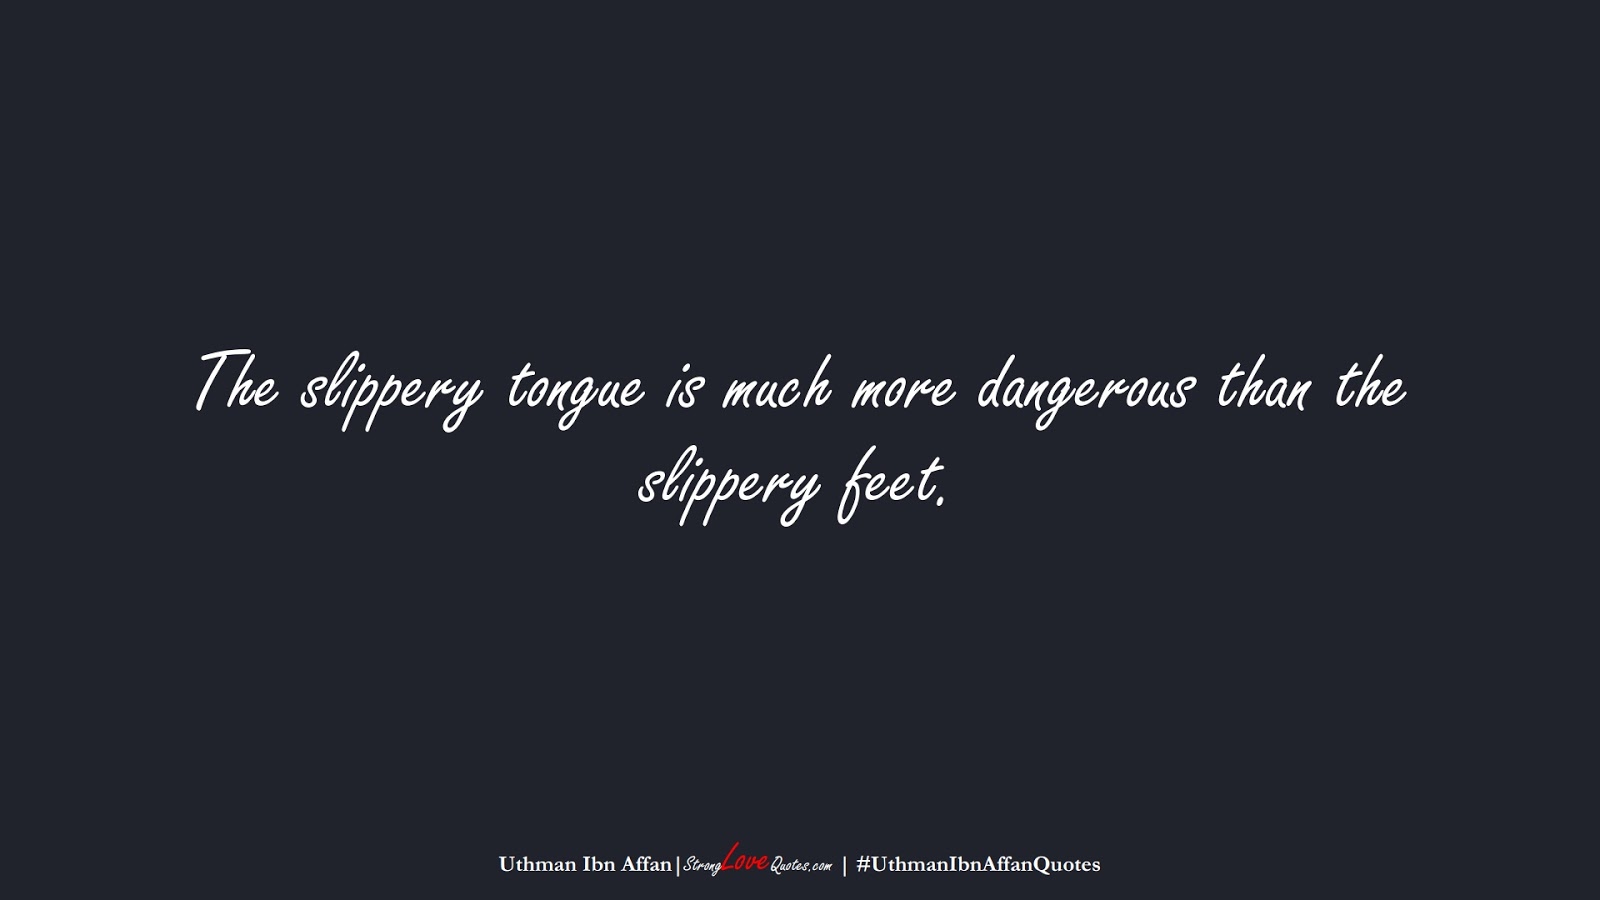 The slippery tongue is much more dangerous than the slippery feet. (Uthman Ibn Affan);  #UthmanIbnAffanQuotes